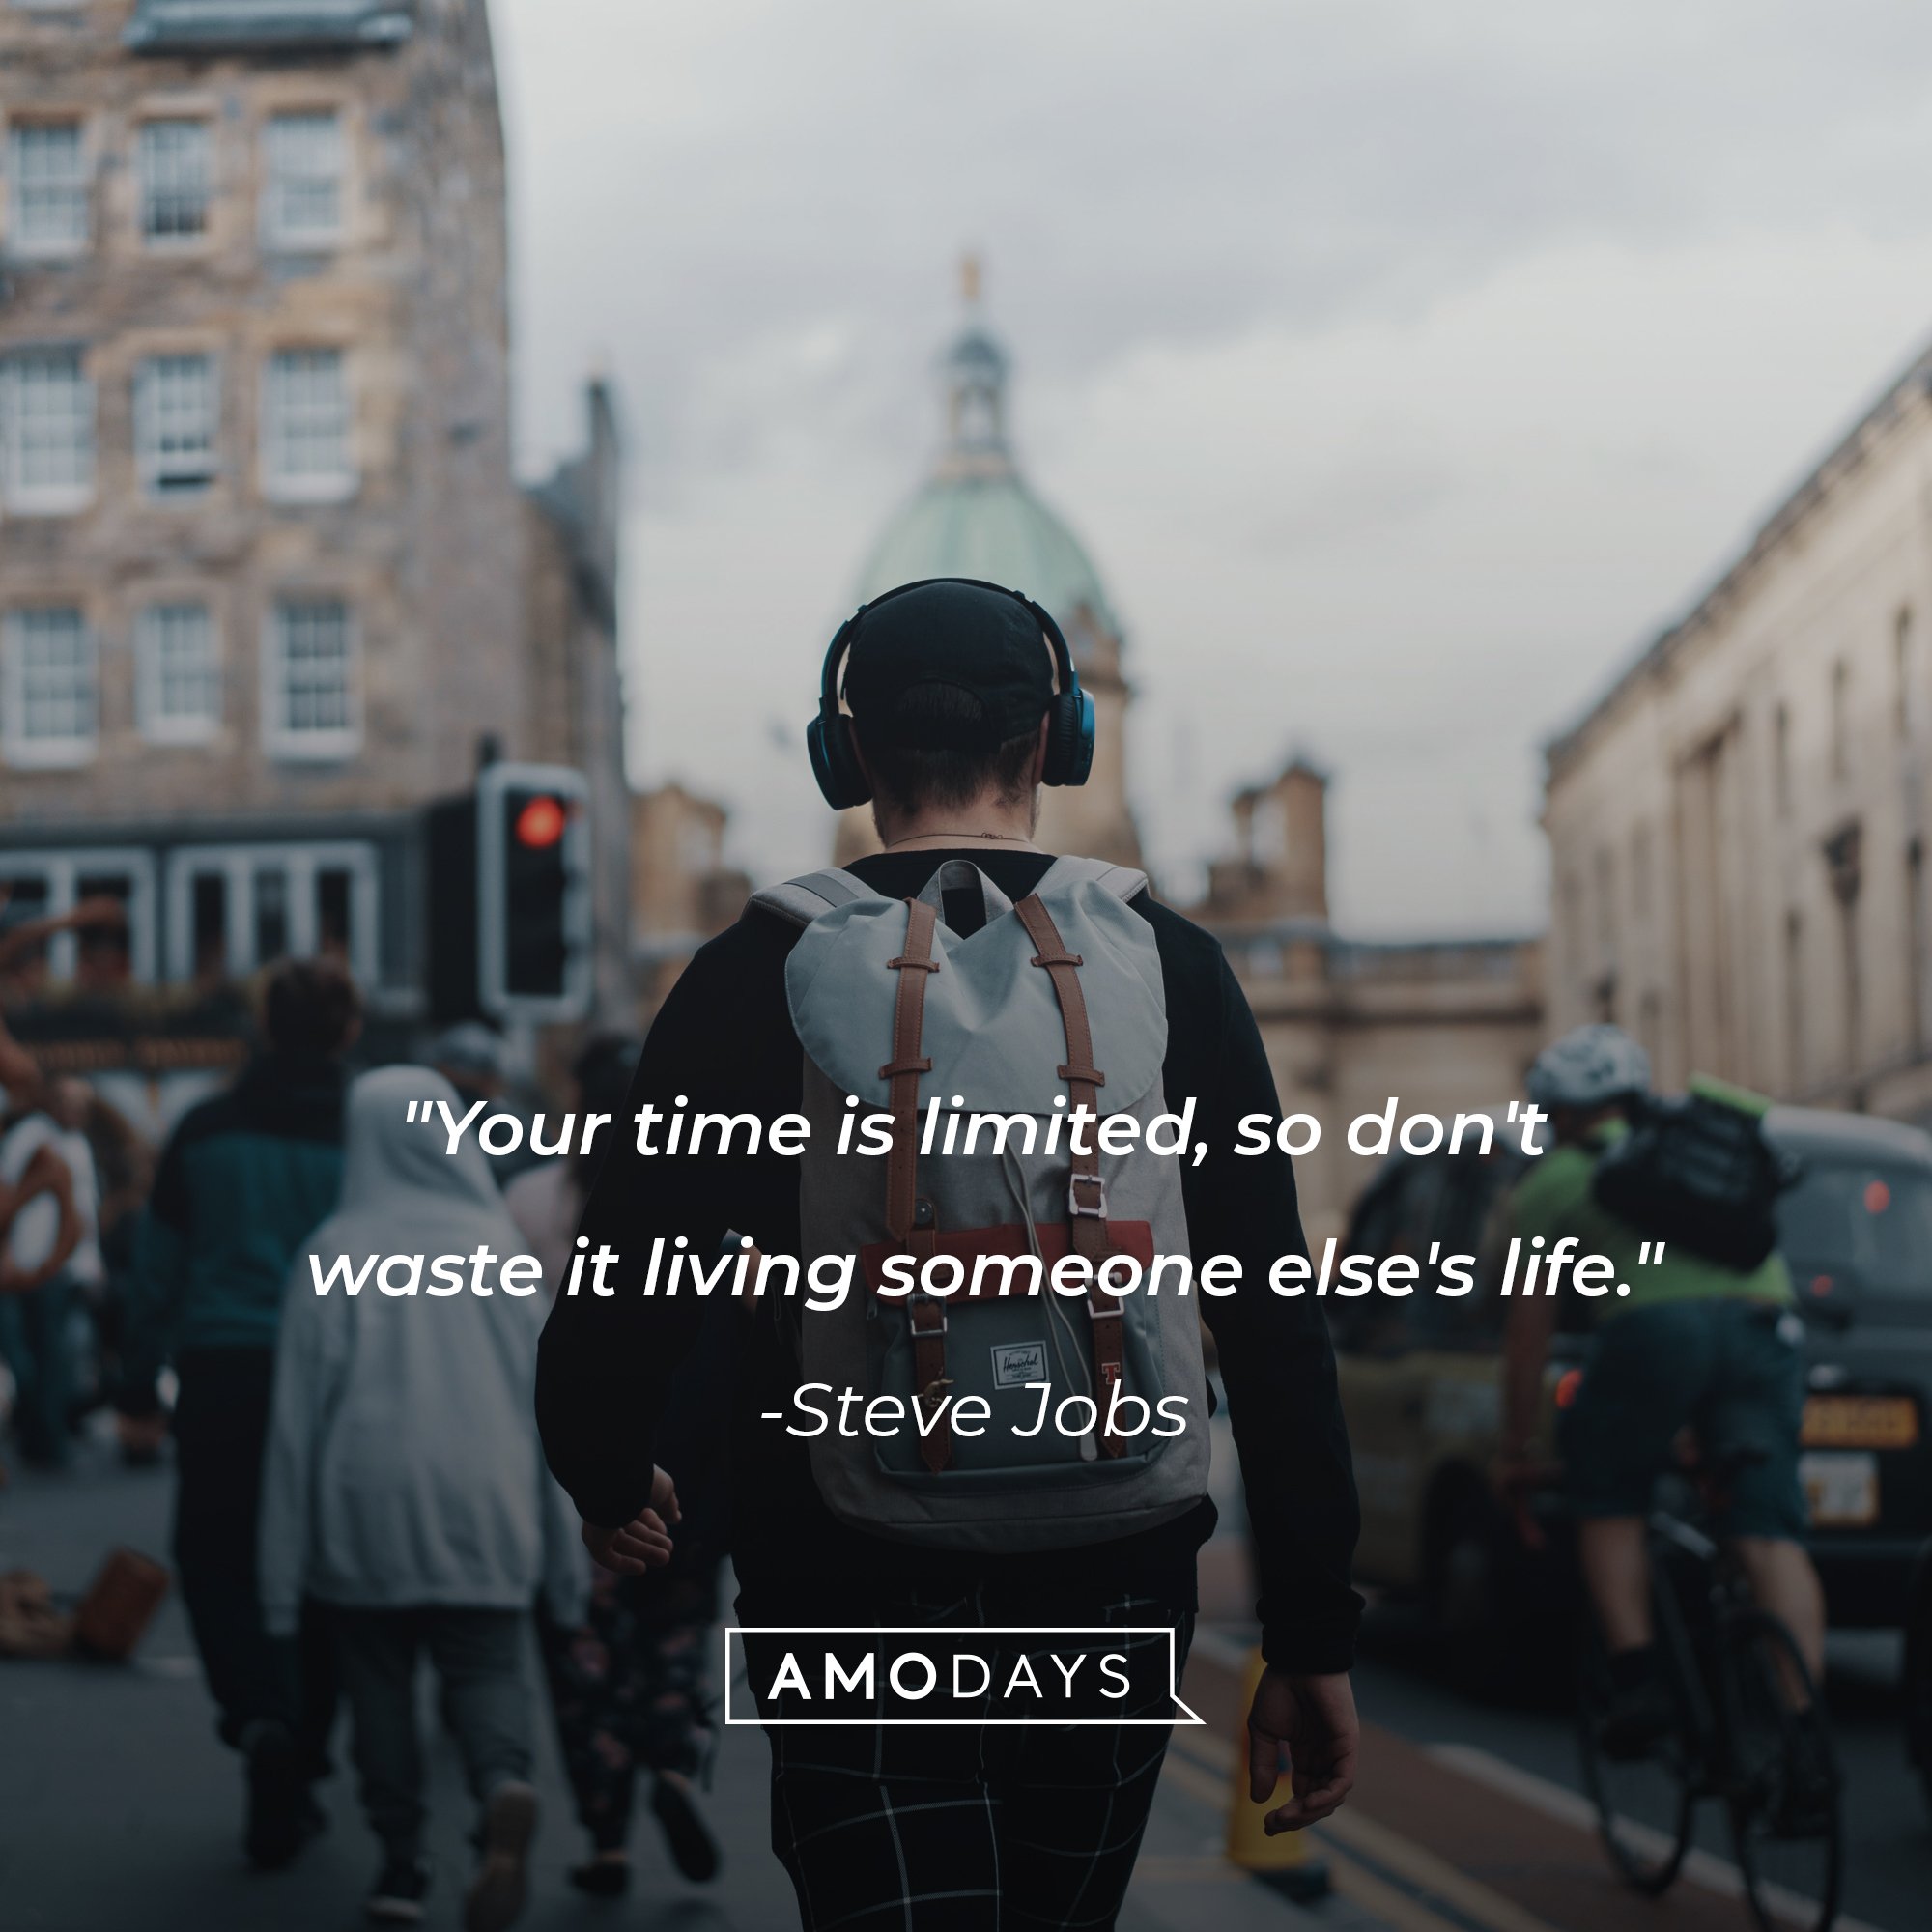 Steve Jobs’ quote: "Your time is limited, so don't waste it living someone else's life." | Image: AmoDays 